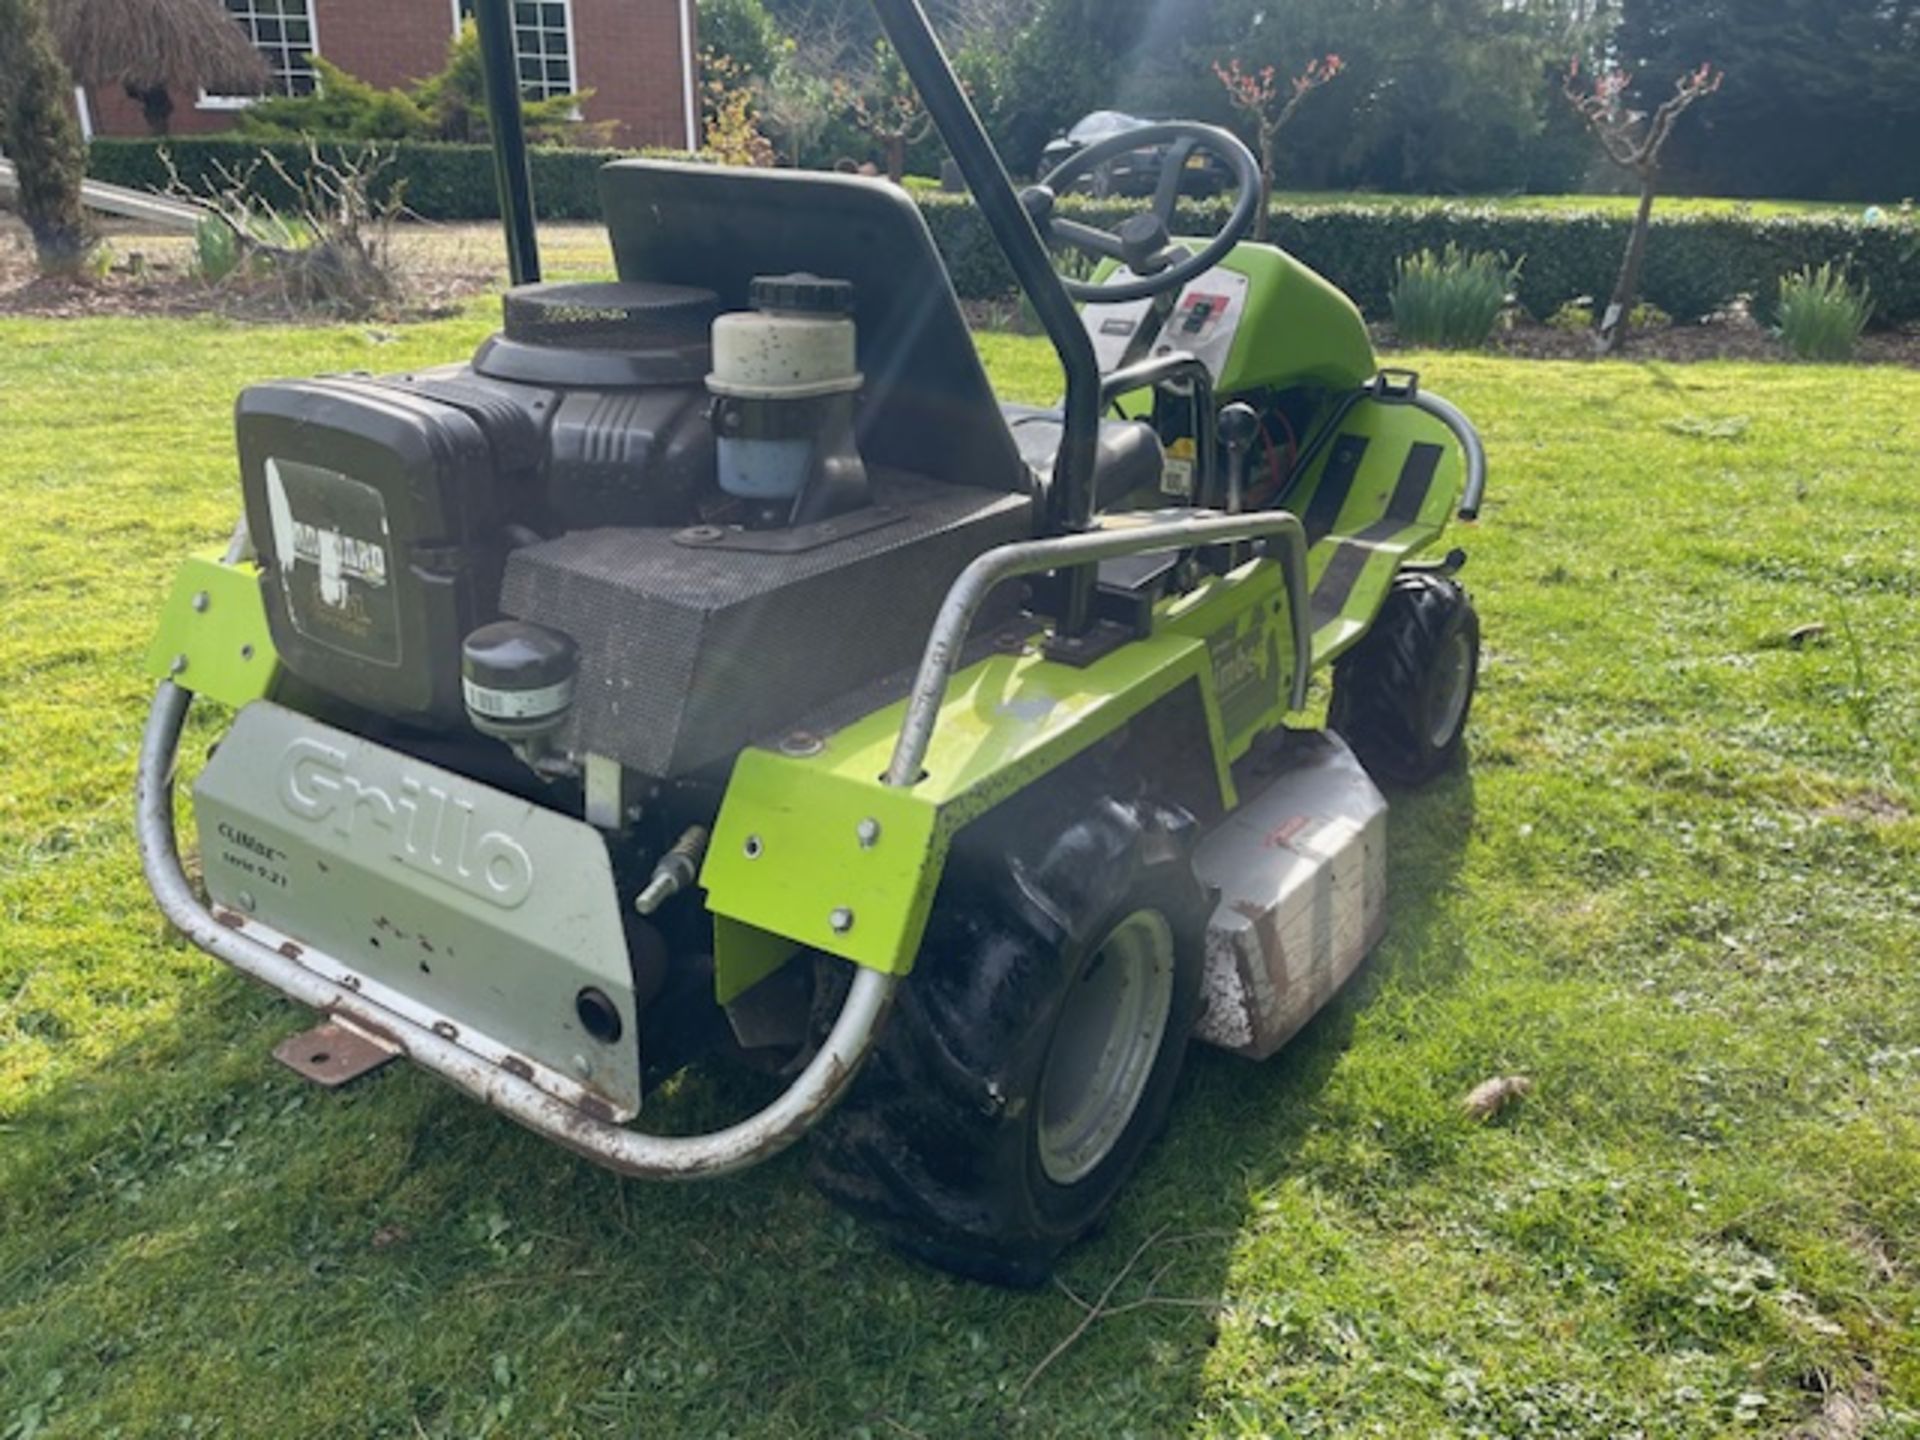 2007, GRILLO CLIMBER 9.21 SERIES RIDE ON MOWER - Image 7 of 10